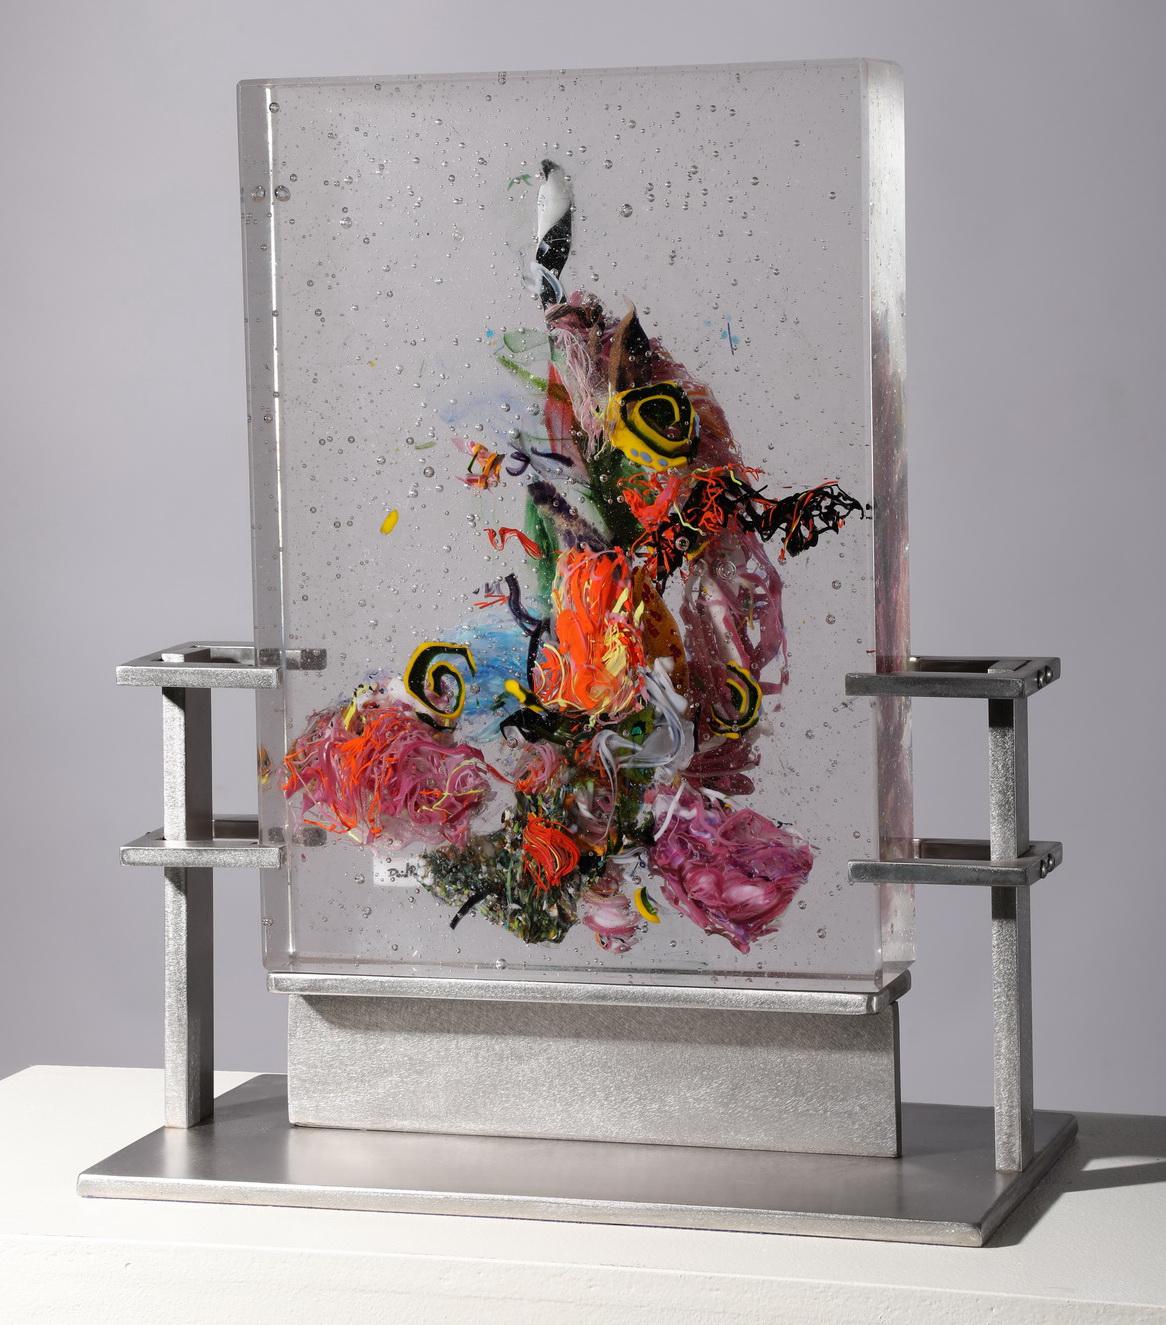 Abstract Cast Glass Sculpture, 'Maina', 2013 by David Ruth